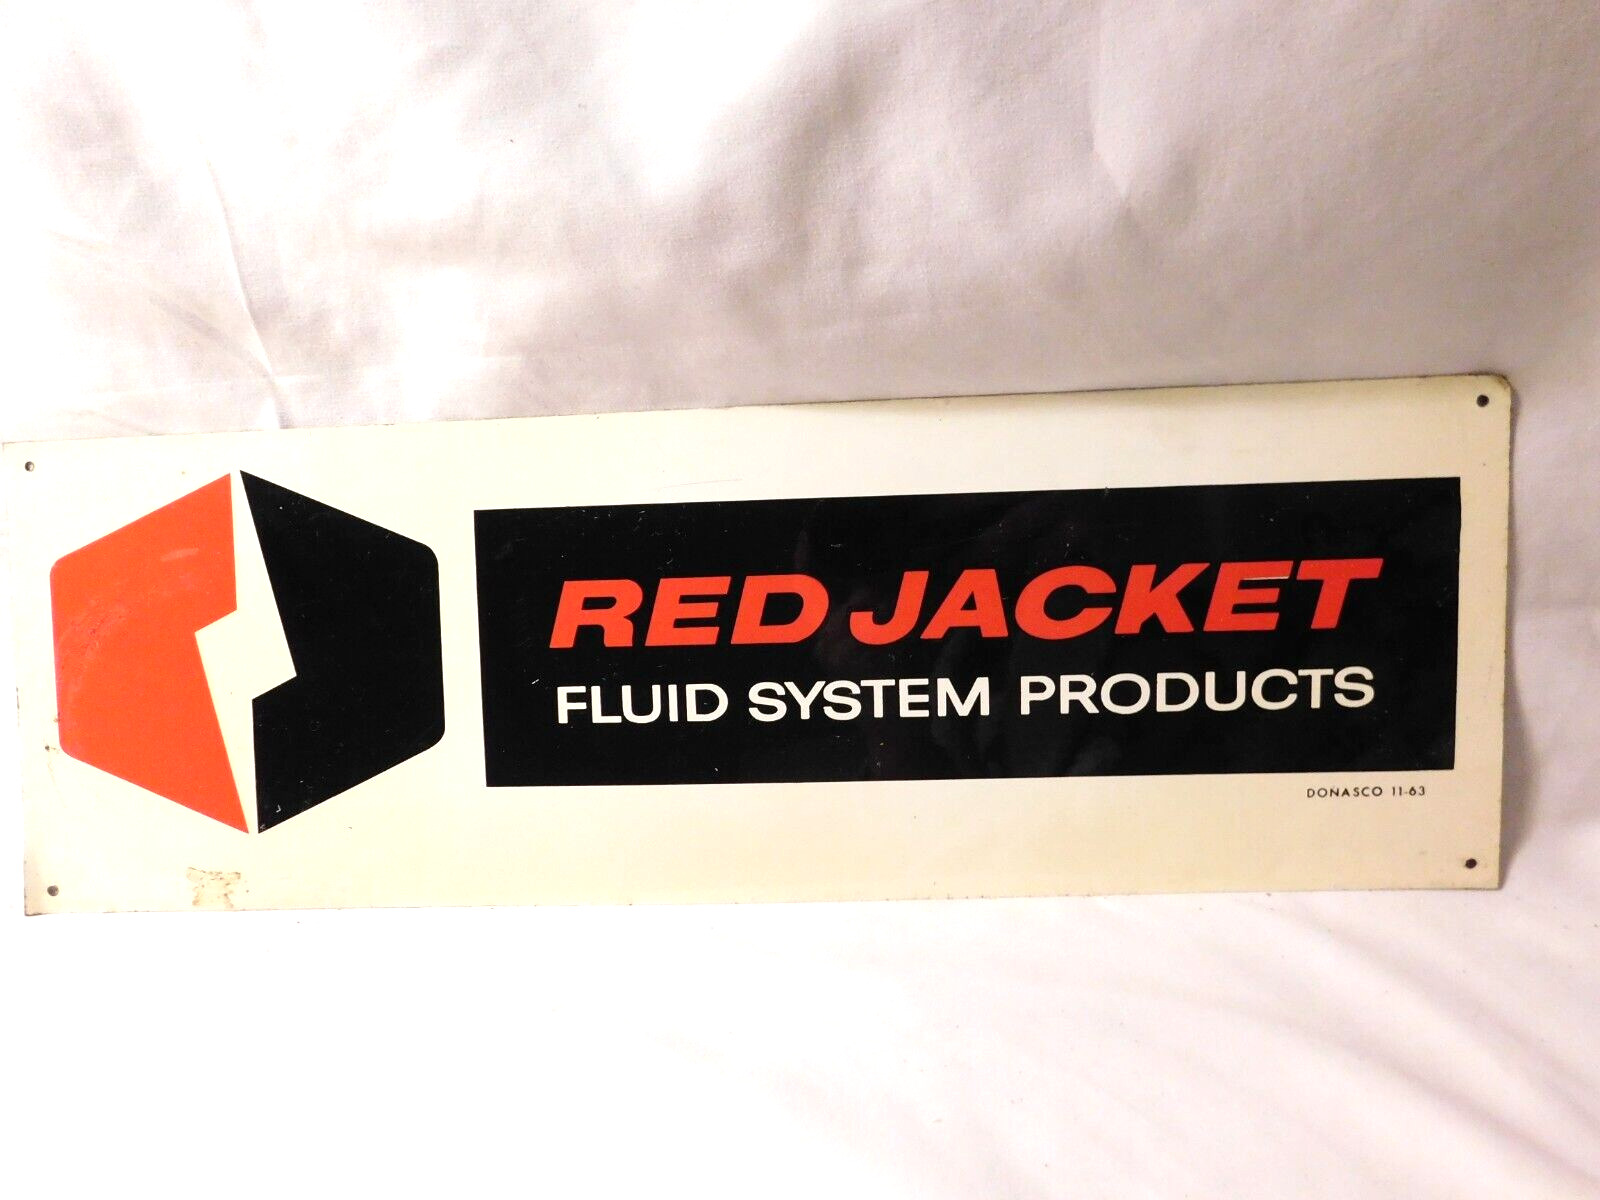 Vintage Red Jacket Fluid System Products Tin Metal Advertising Sign Donasco 1963